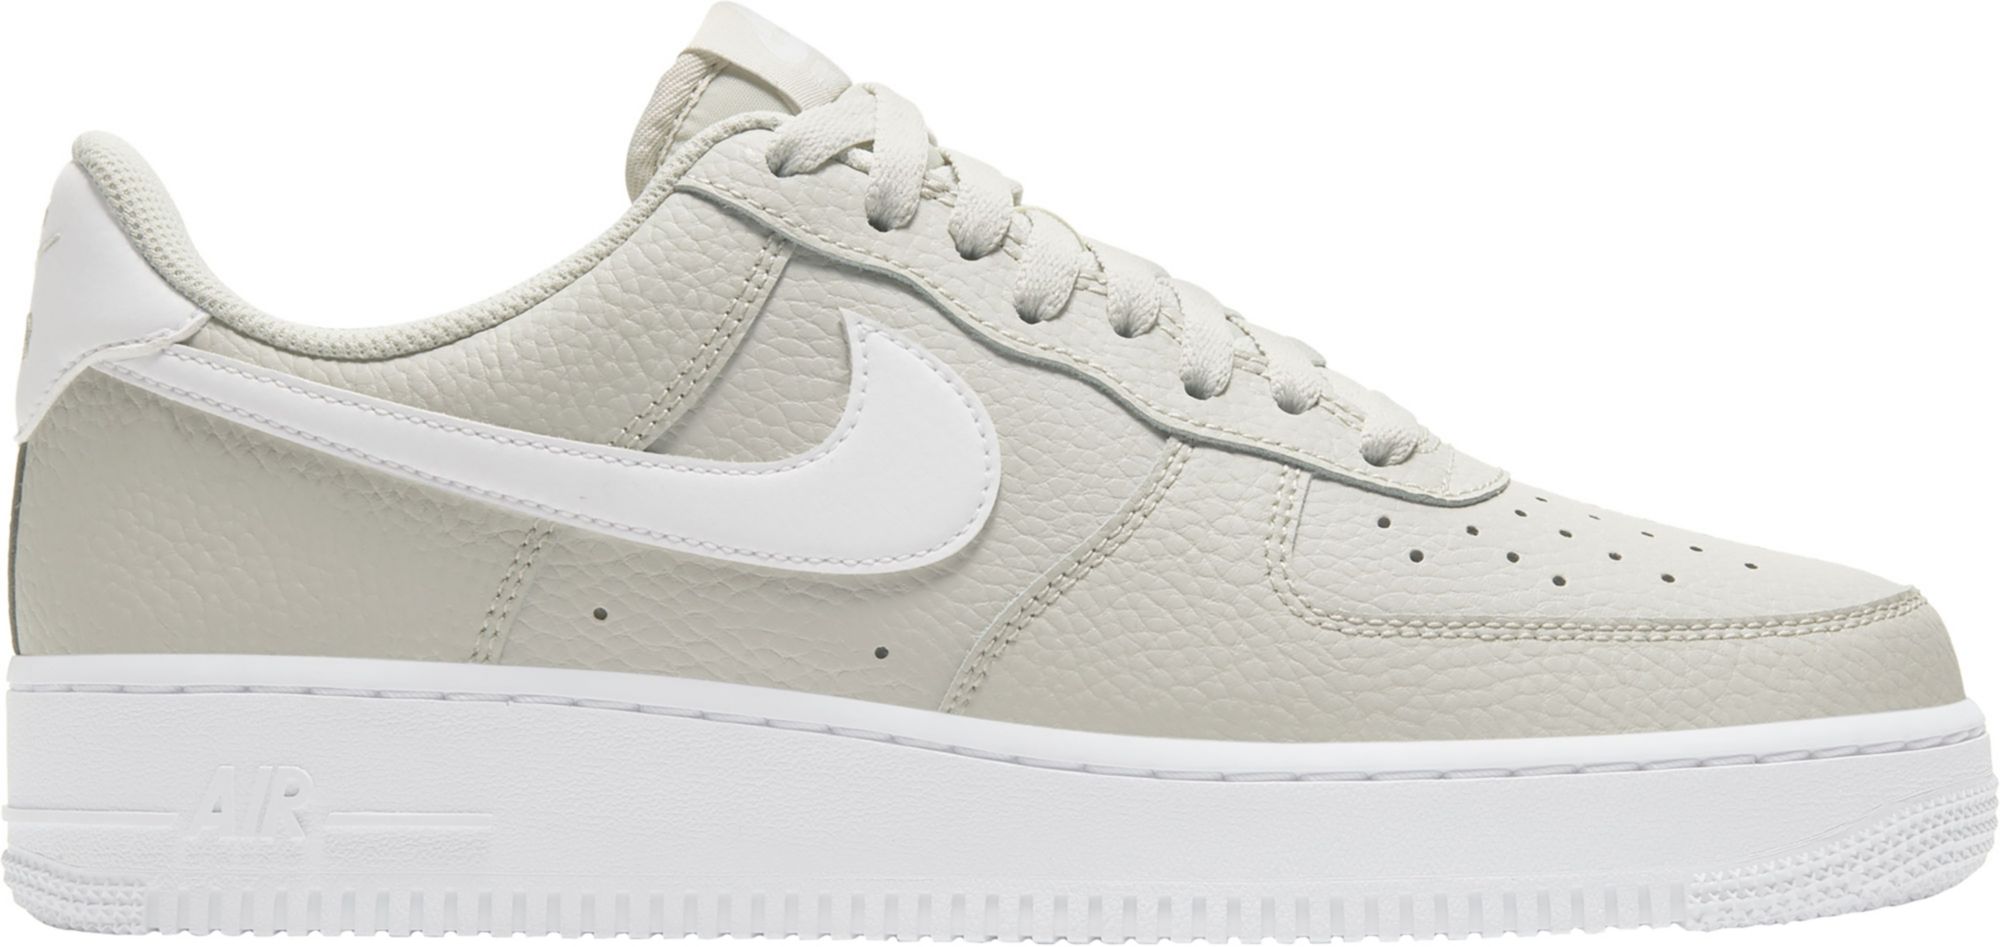 air force ones in stores near me